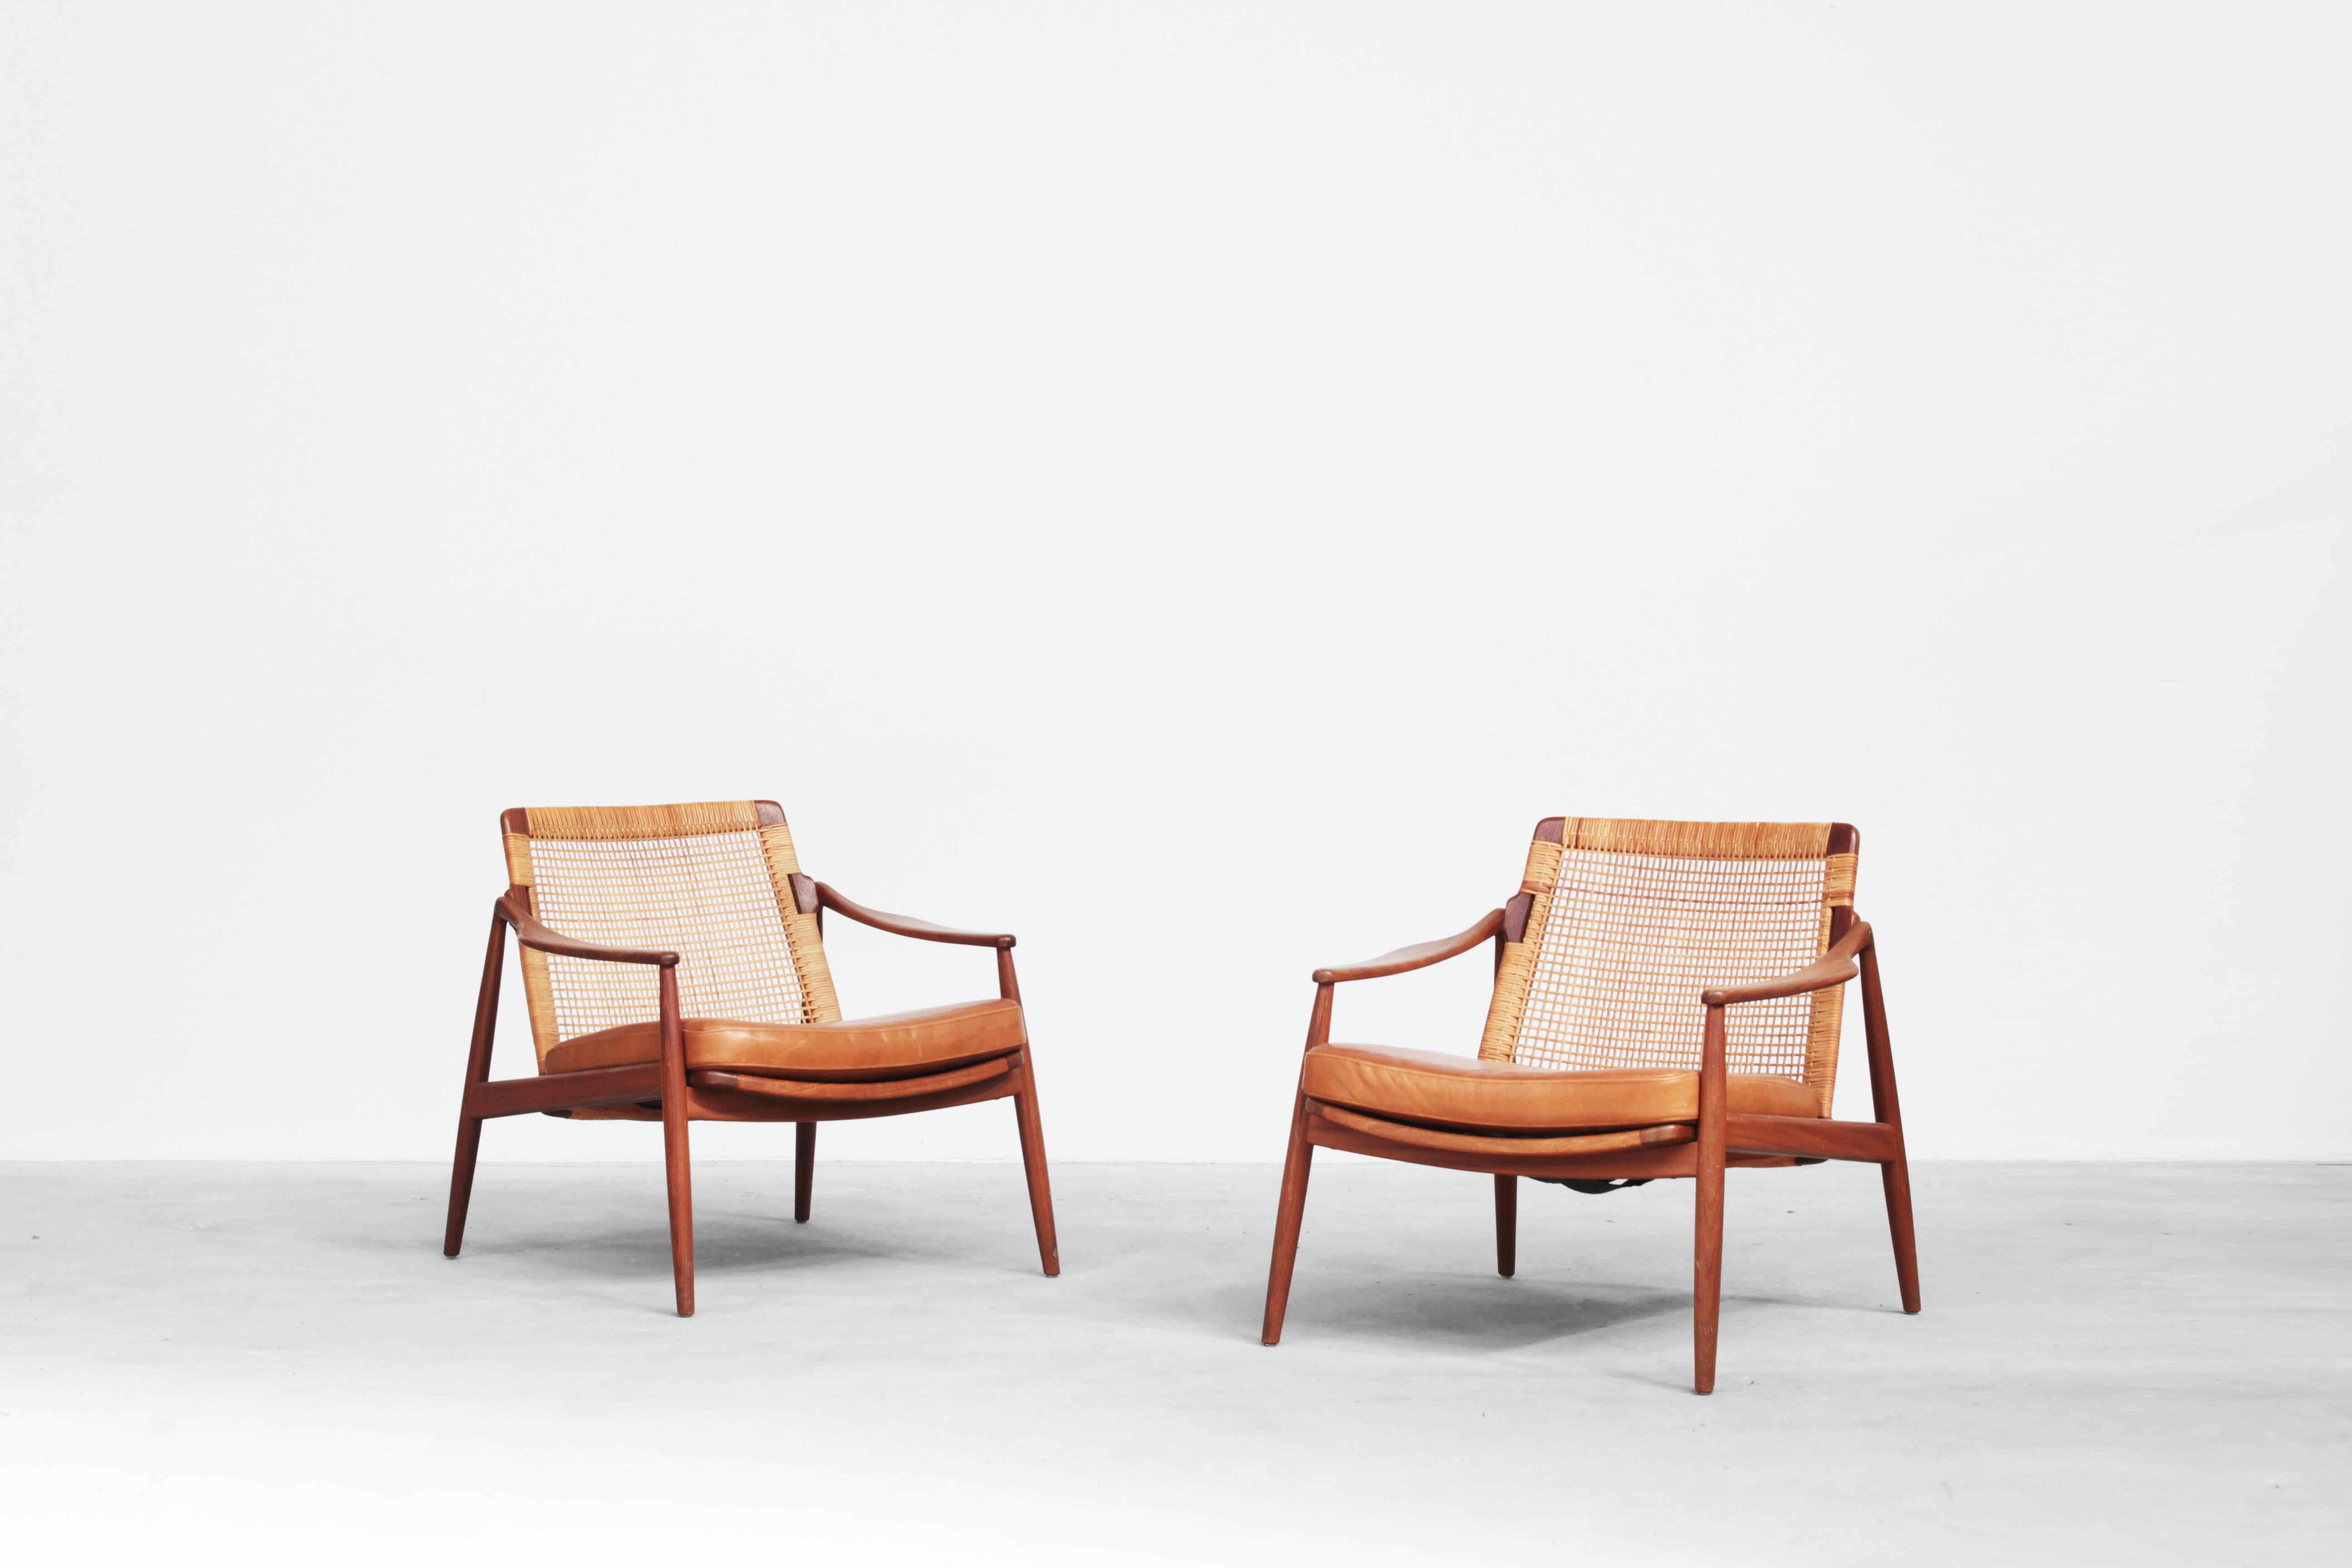 Very beautiful lounge chairs designed by Hartmut Lohmeyer for Wilkhahn in the 1950s, made in Germany. Very beautifully shaped, newly reupholstered with a high-quality leather in brown-cognac, the cane, and the teak wood frame are in excellent